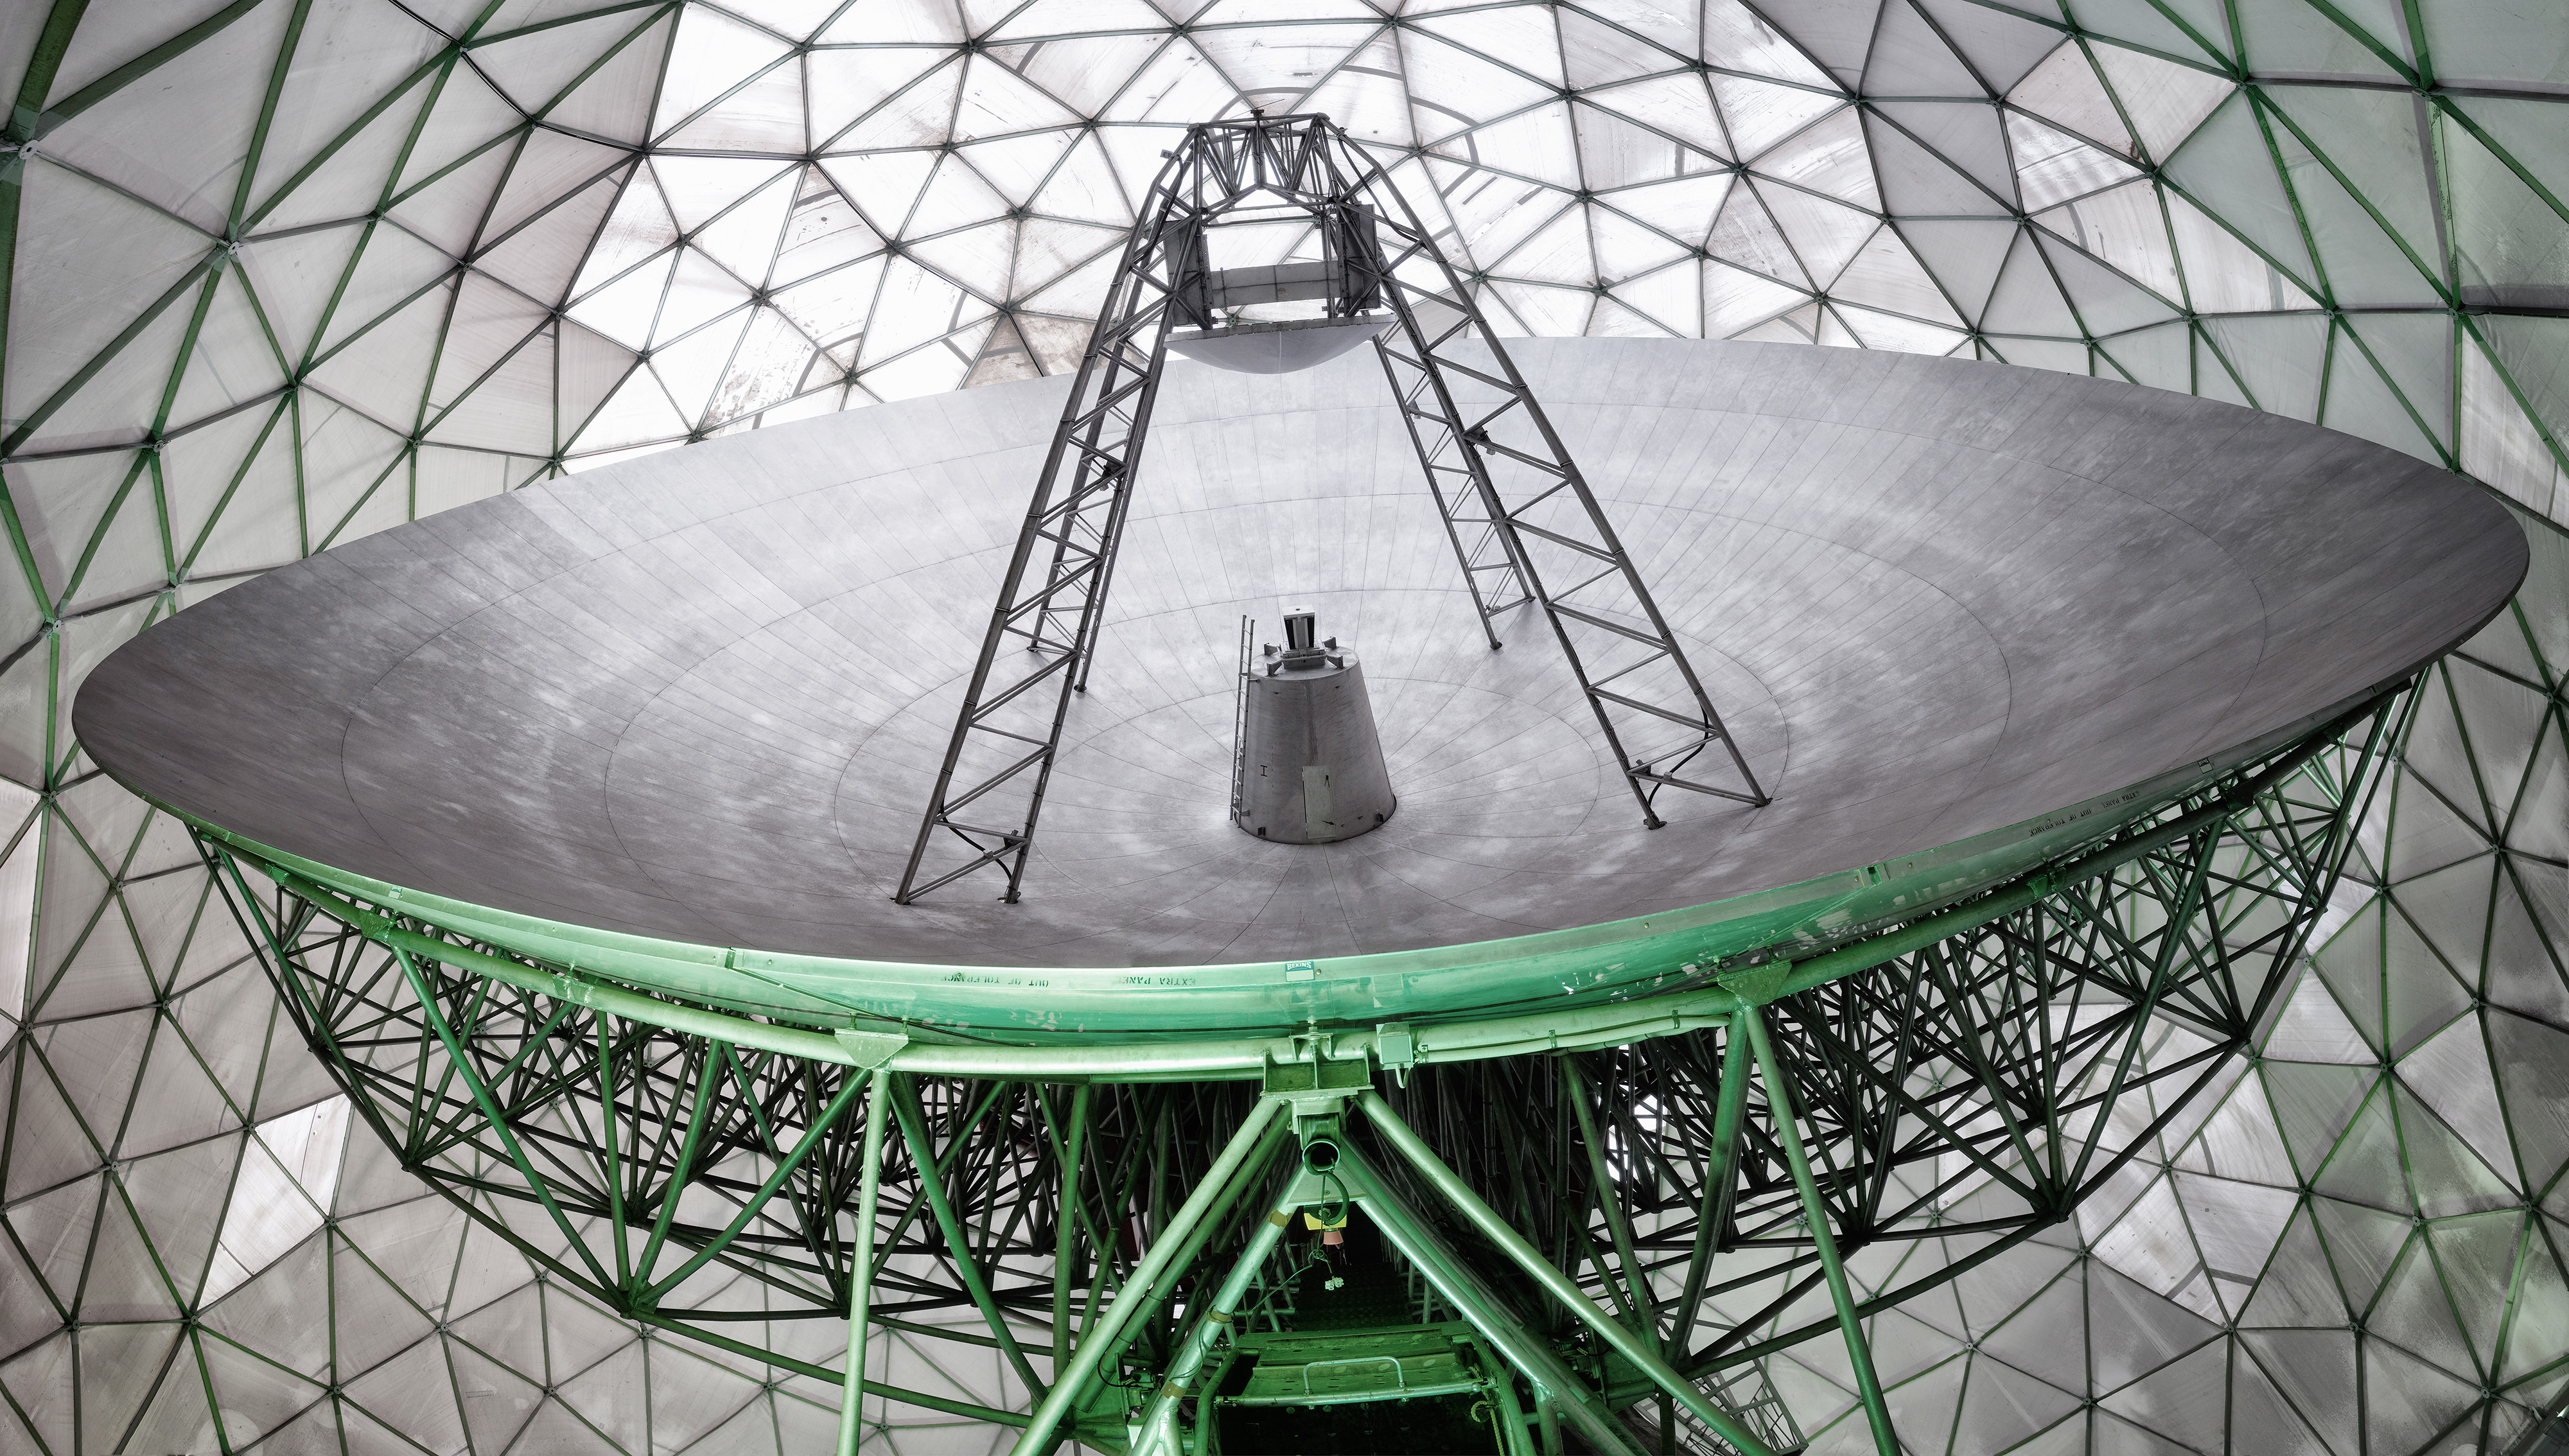 Protected by the largest radome in the world, the space observation radar TIRA has an antenna with a parabolic reflector that is 34 meters in diameter. In spite of its size and a weight of 240 tons, the reflector can be turned 360° in azimuth (horizontal) in just 15 seconds and 90° in elevation (vertical).